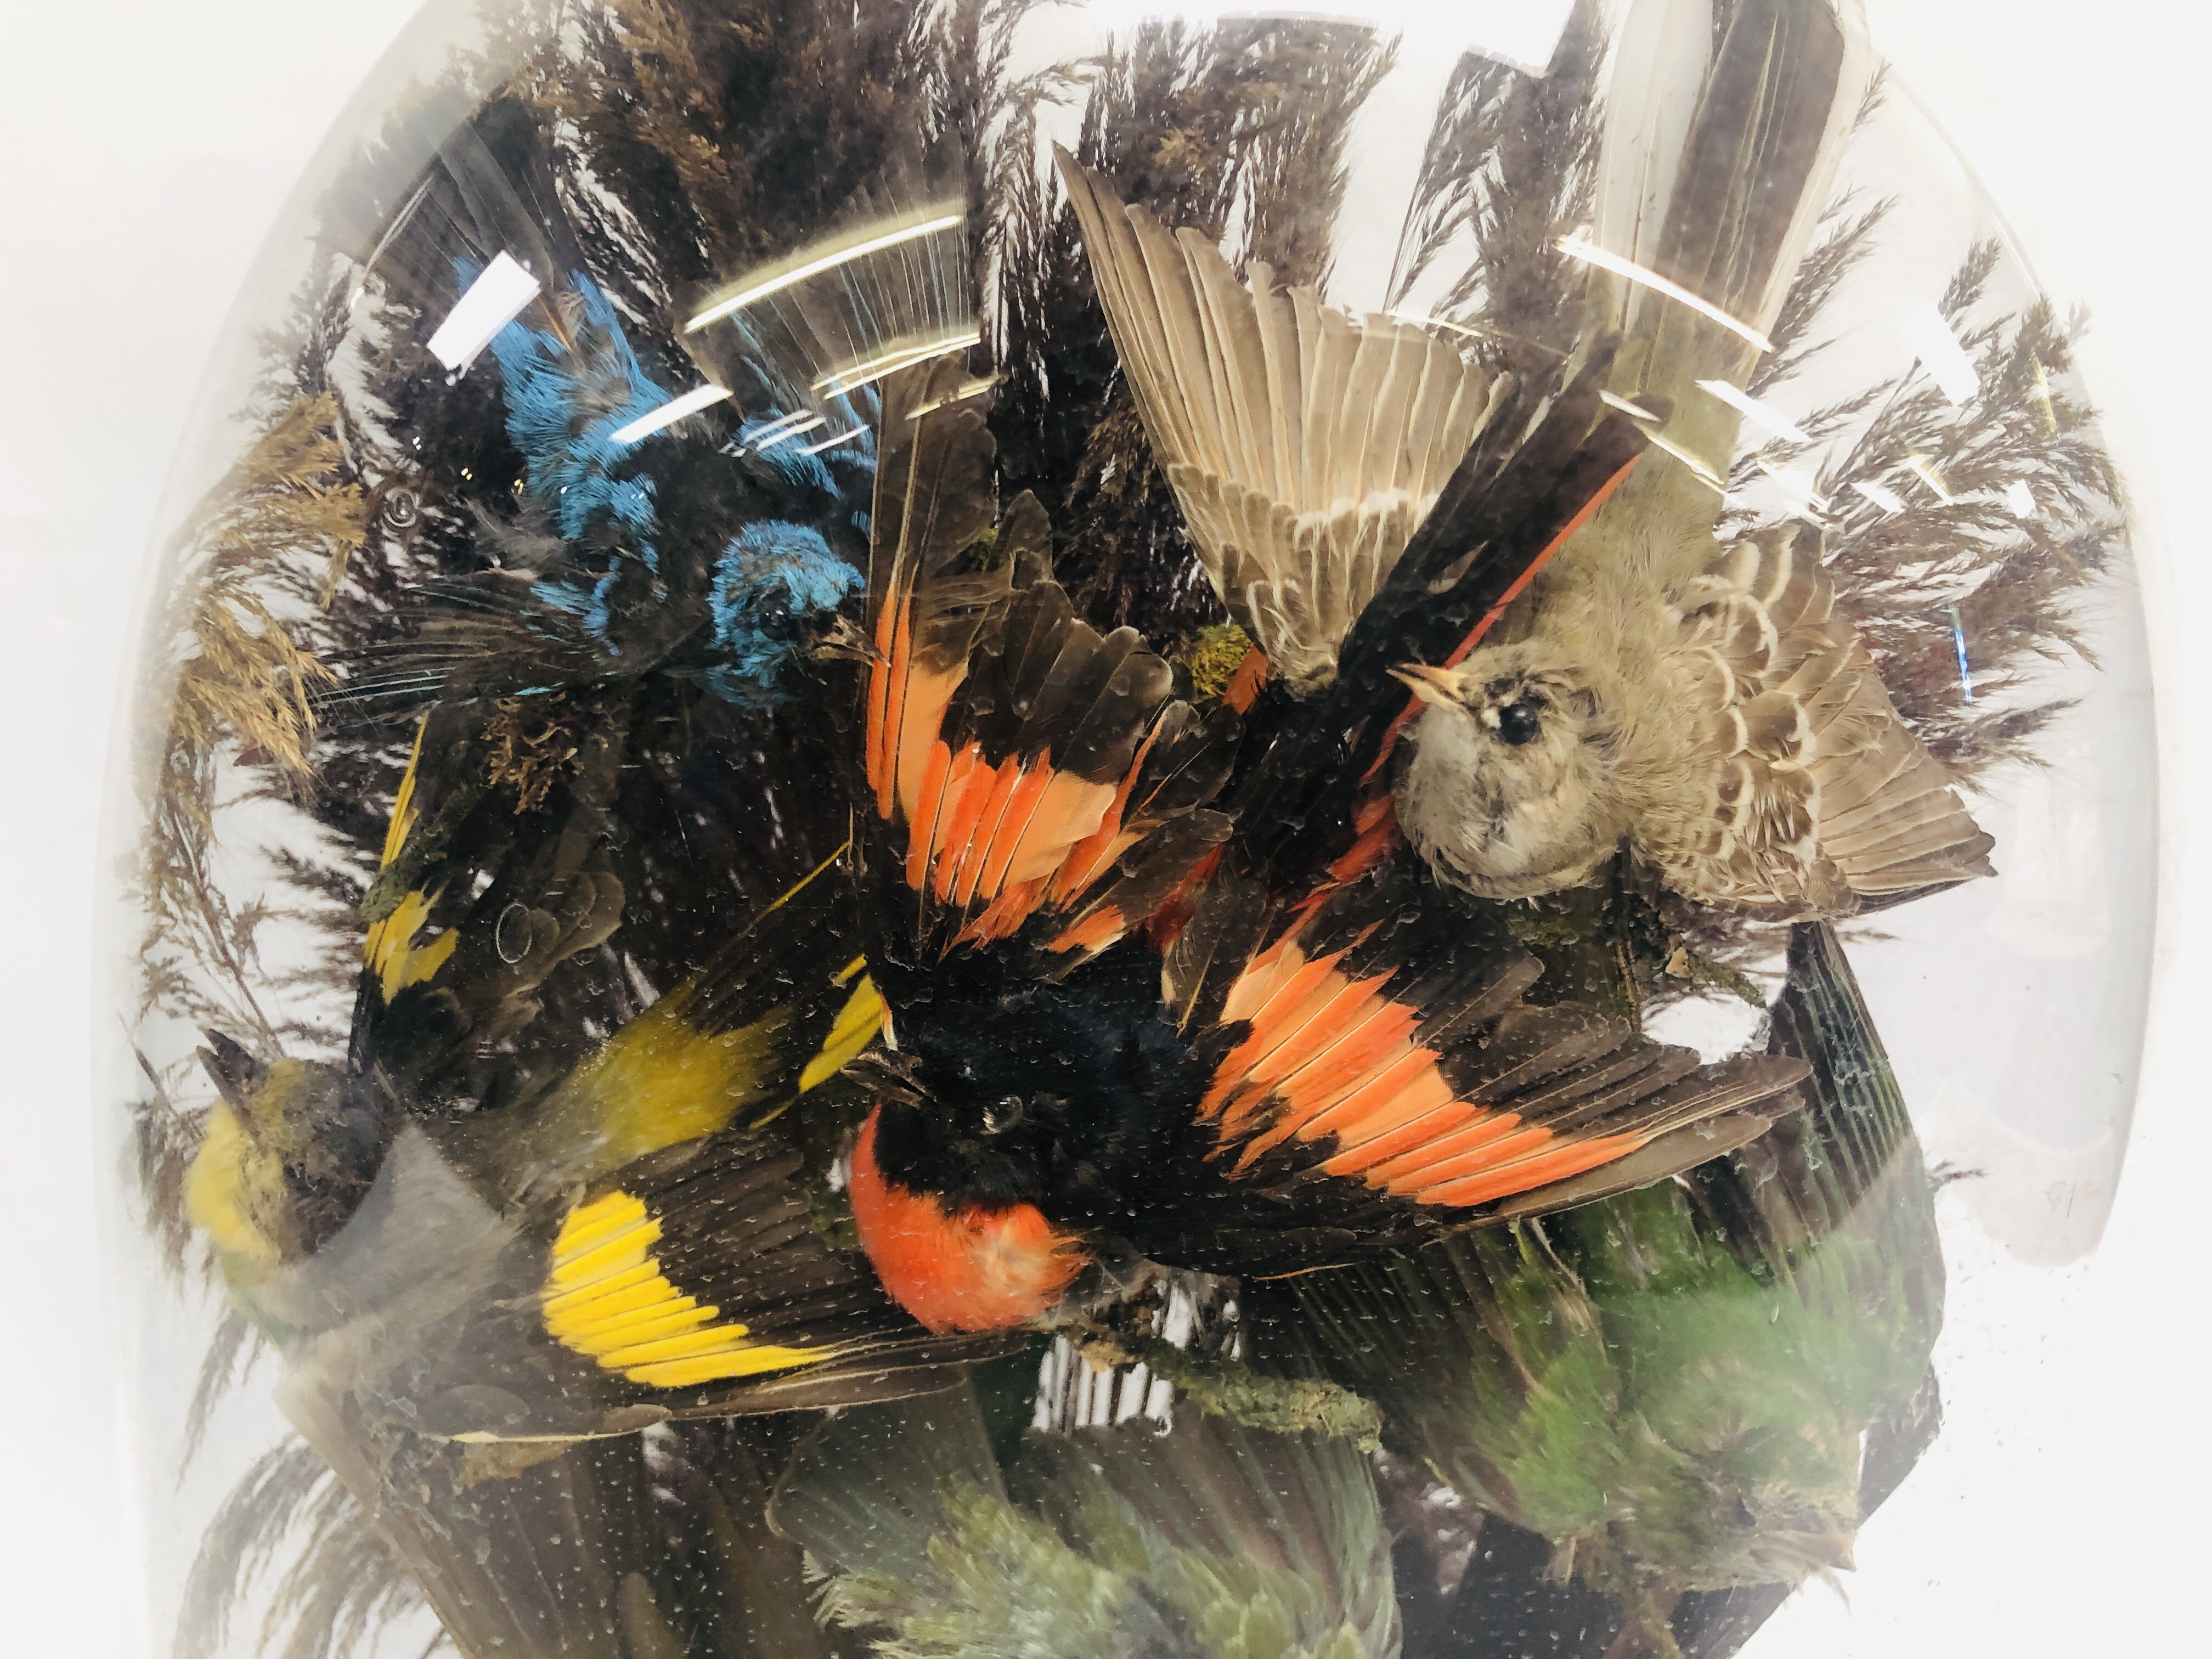 VICTORIAN TAXIDERMY DISPLAY OF EXOTIC BIRDS PRESENTED UNDER A GLASS DOME (8 BIRDS) H 50CM. - Image 2 of 11